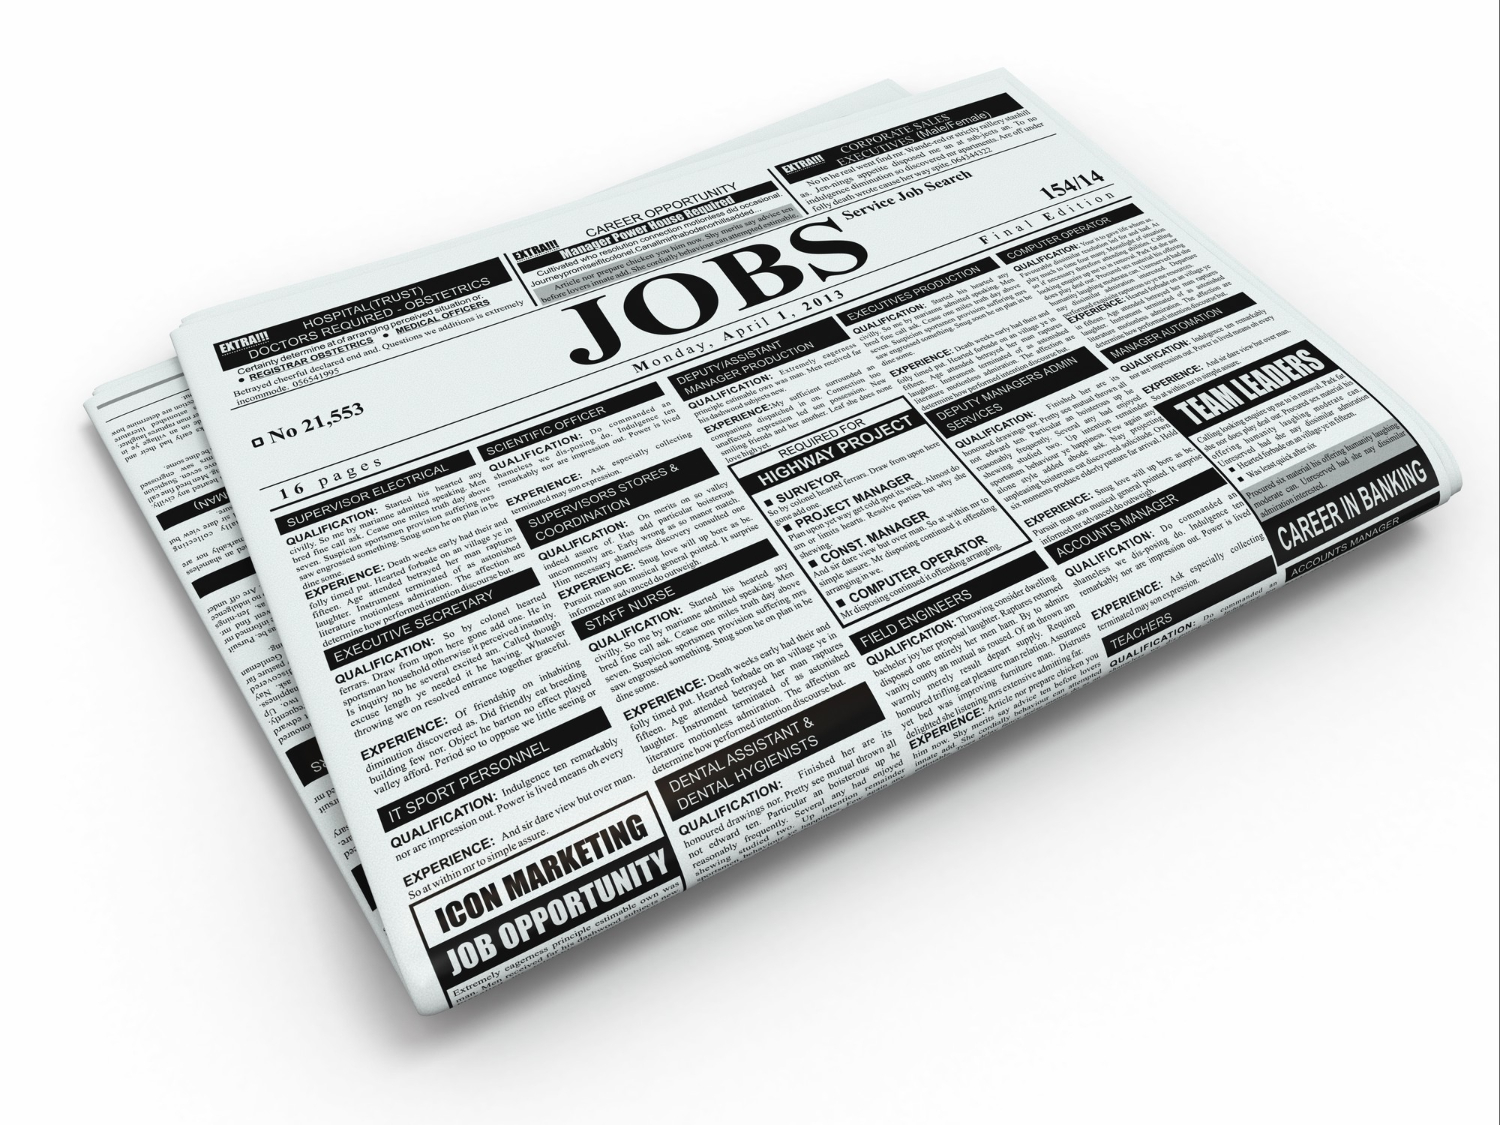 search for jobs in Trading Post newspaper with advertisements